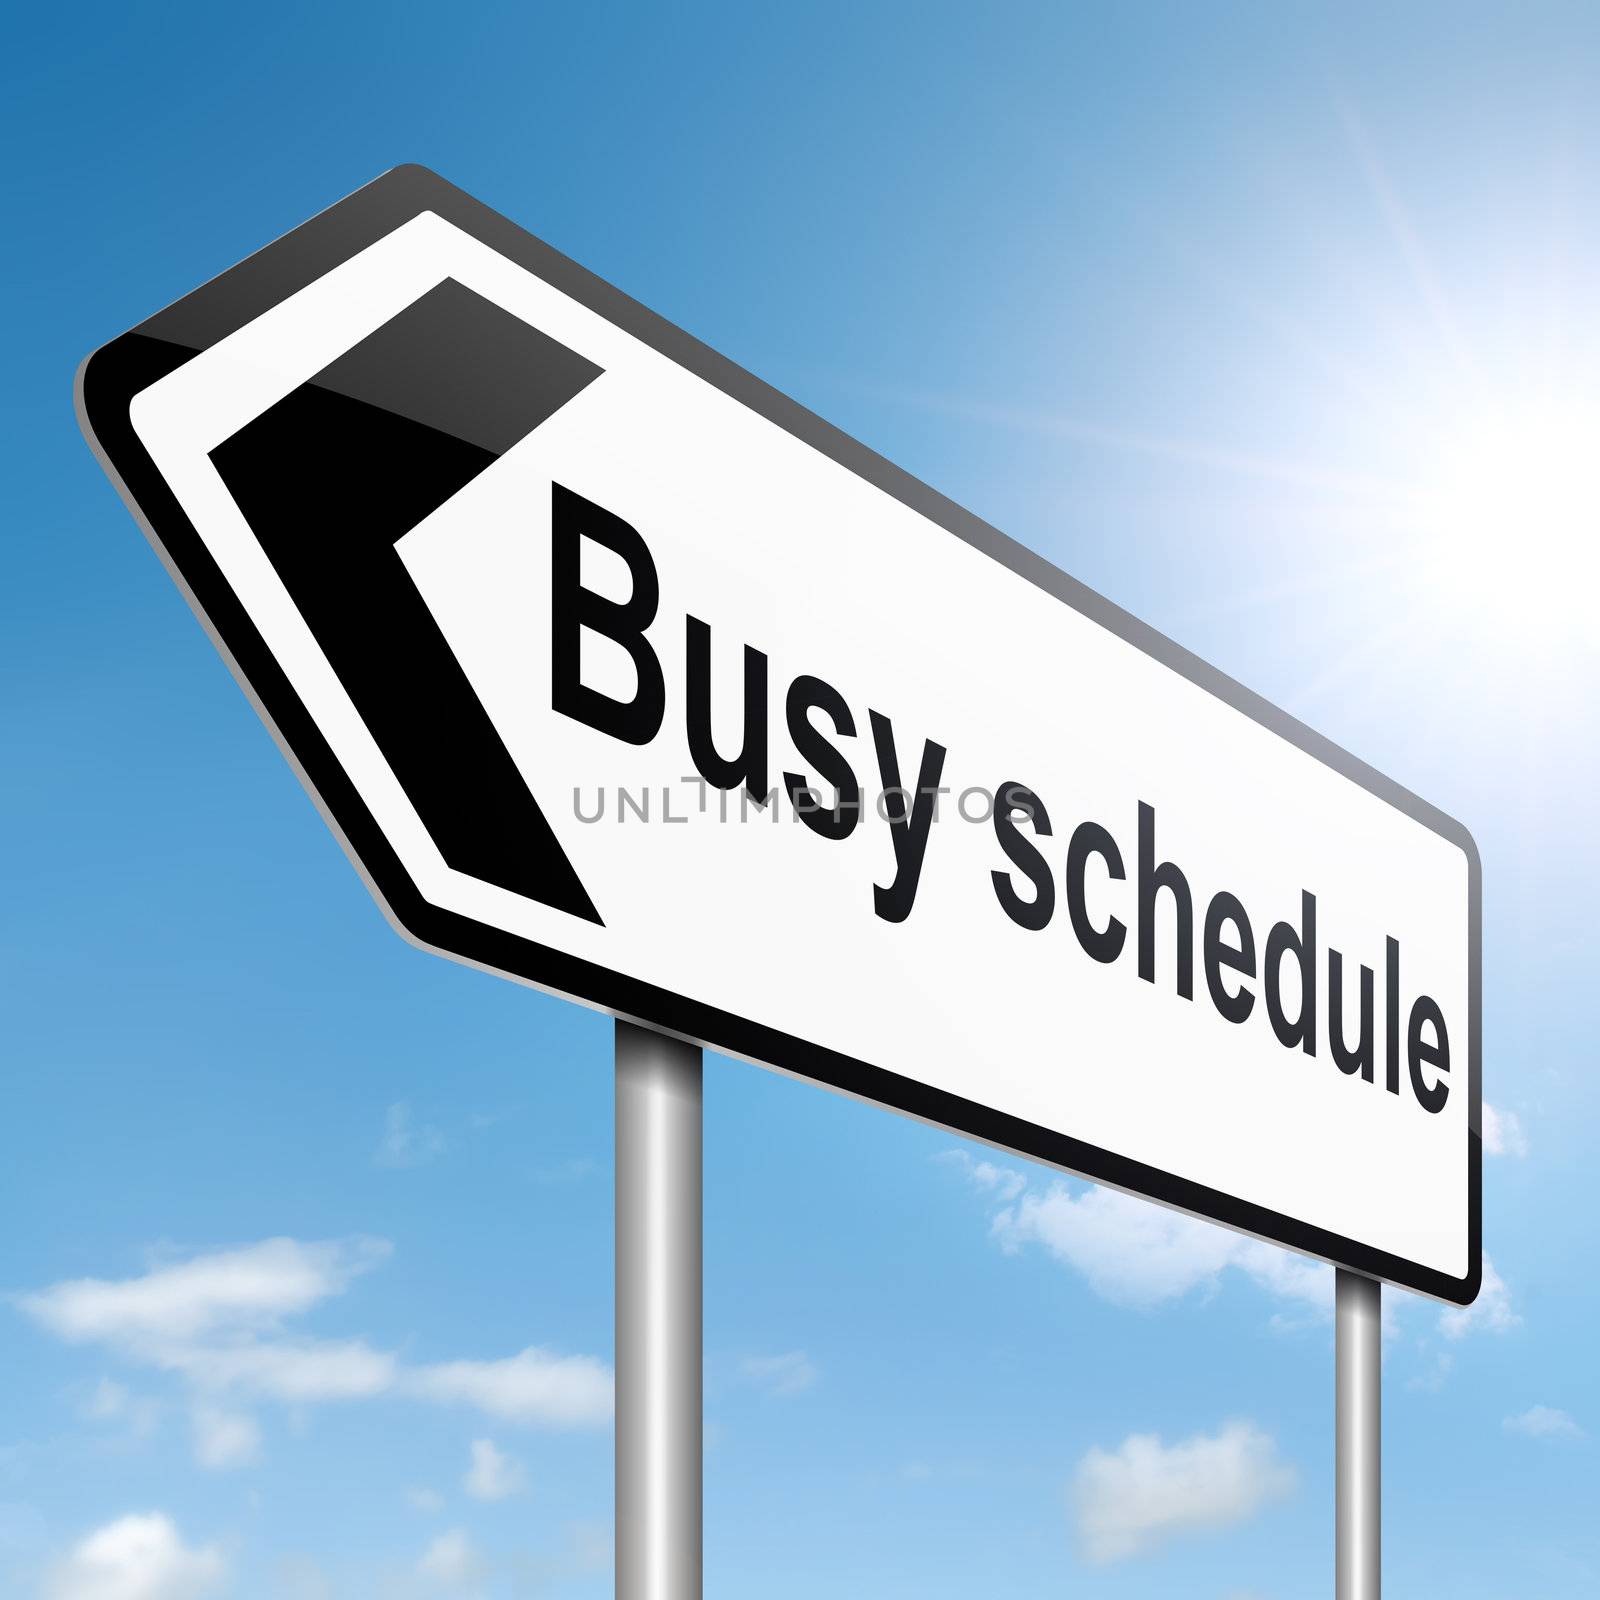 Illustration depicting a roadsign with a busy schedule concept. Sky background.